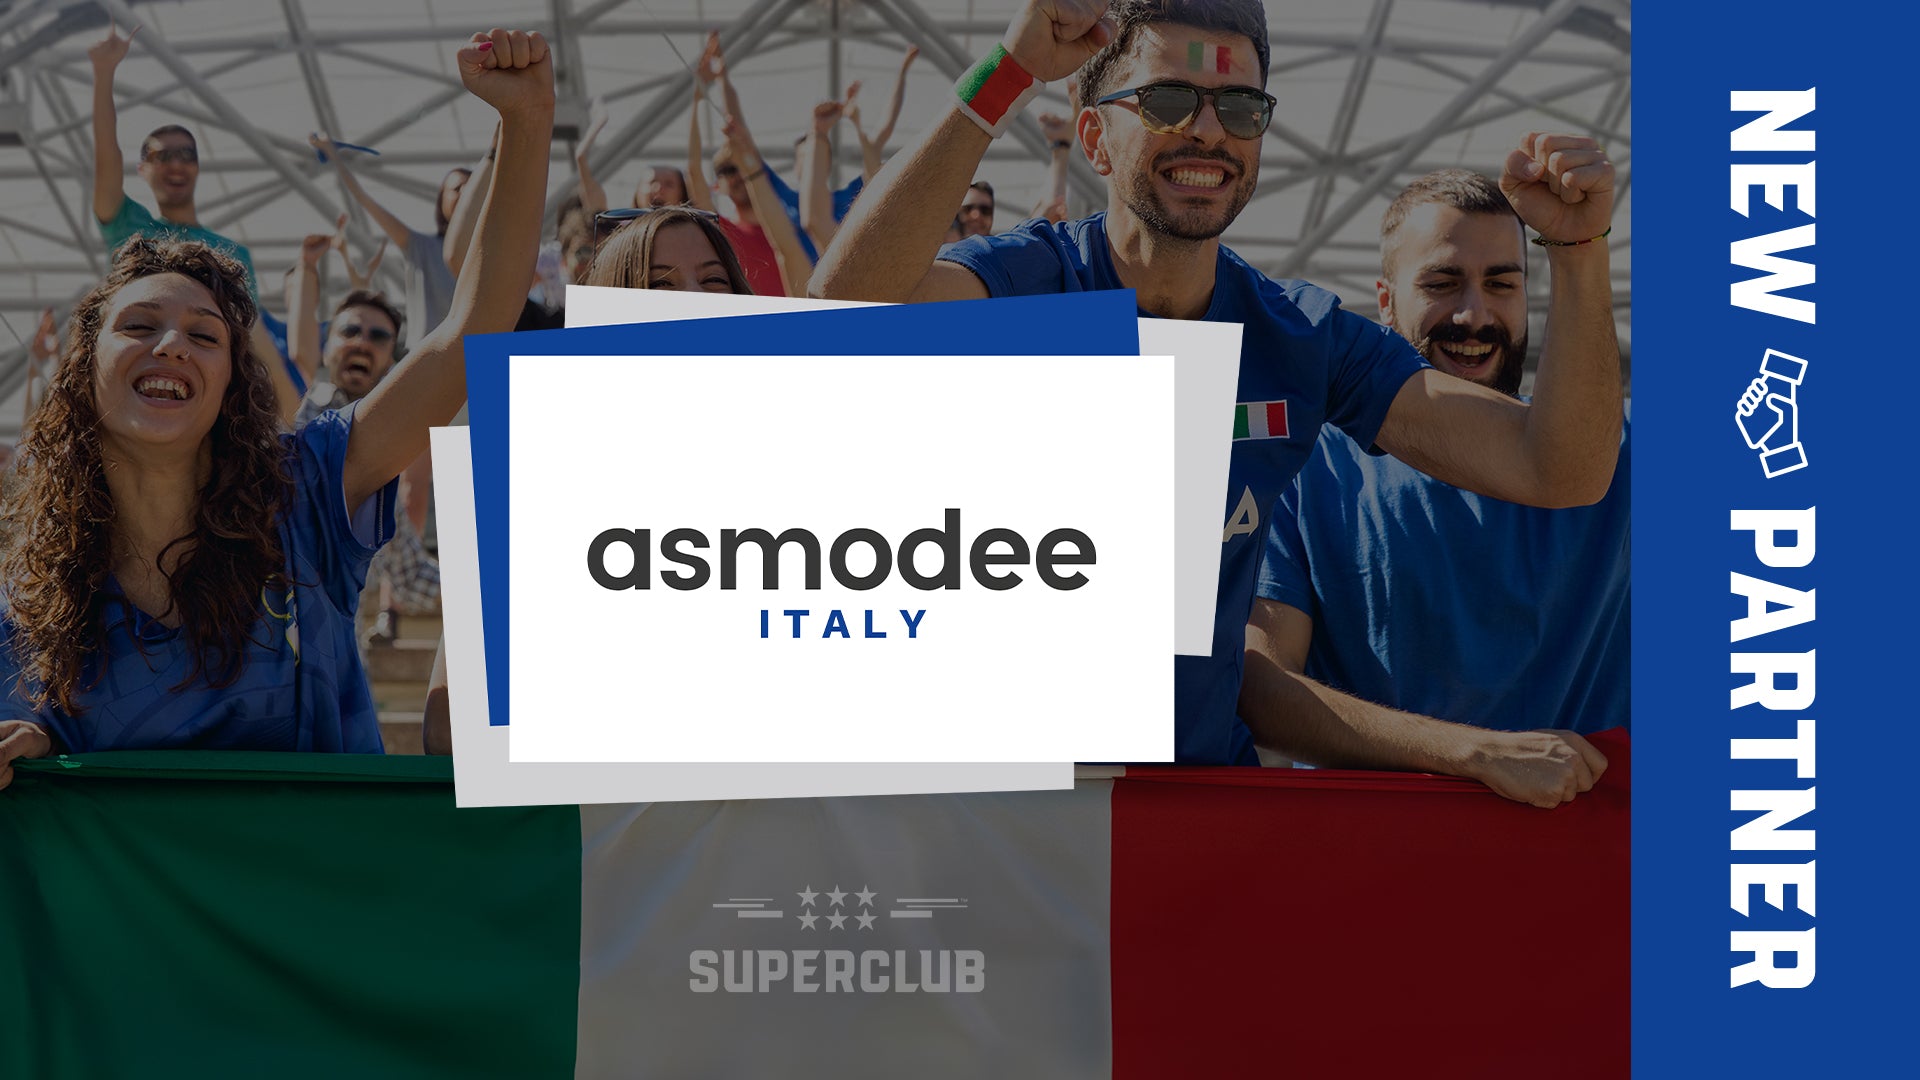 Superclub signs with Asmodee Italy